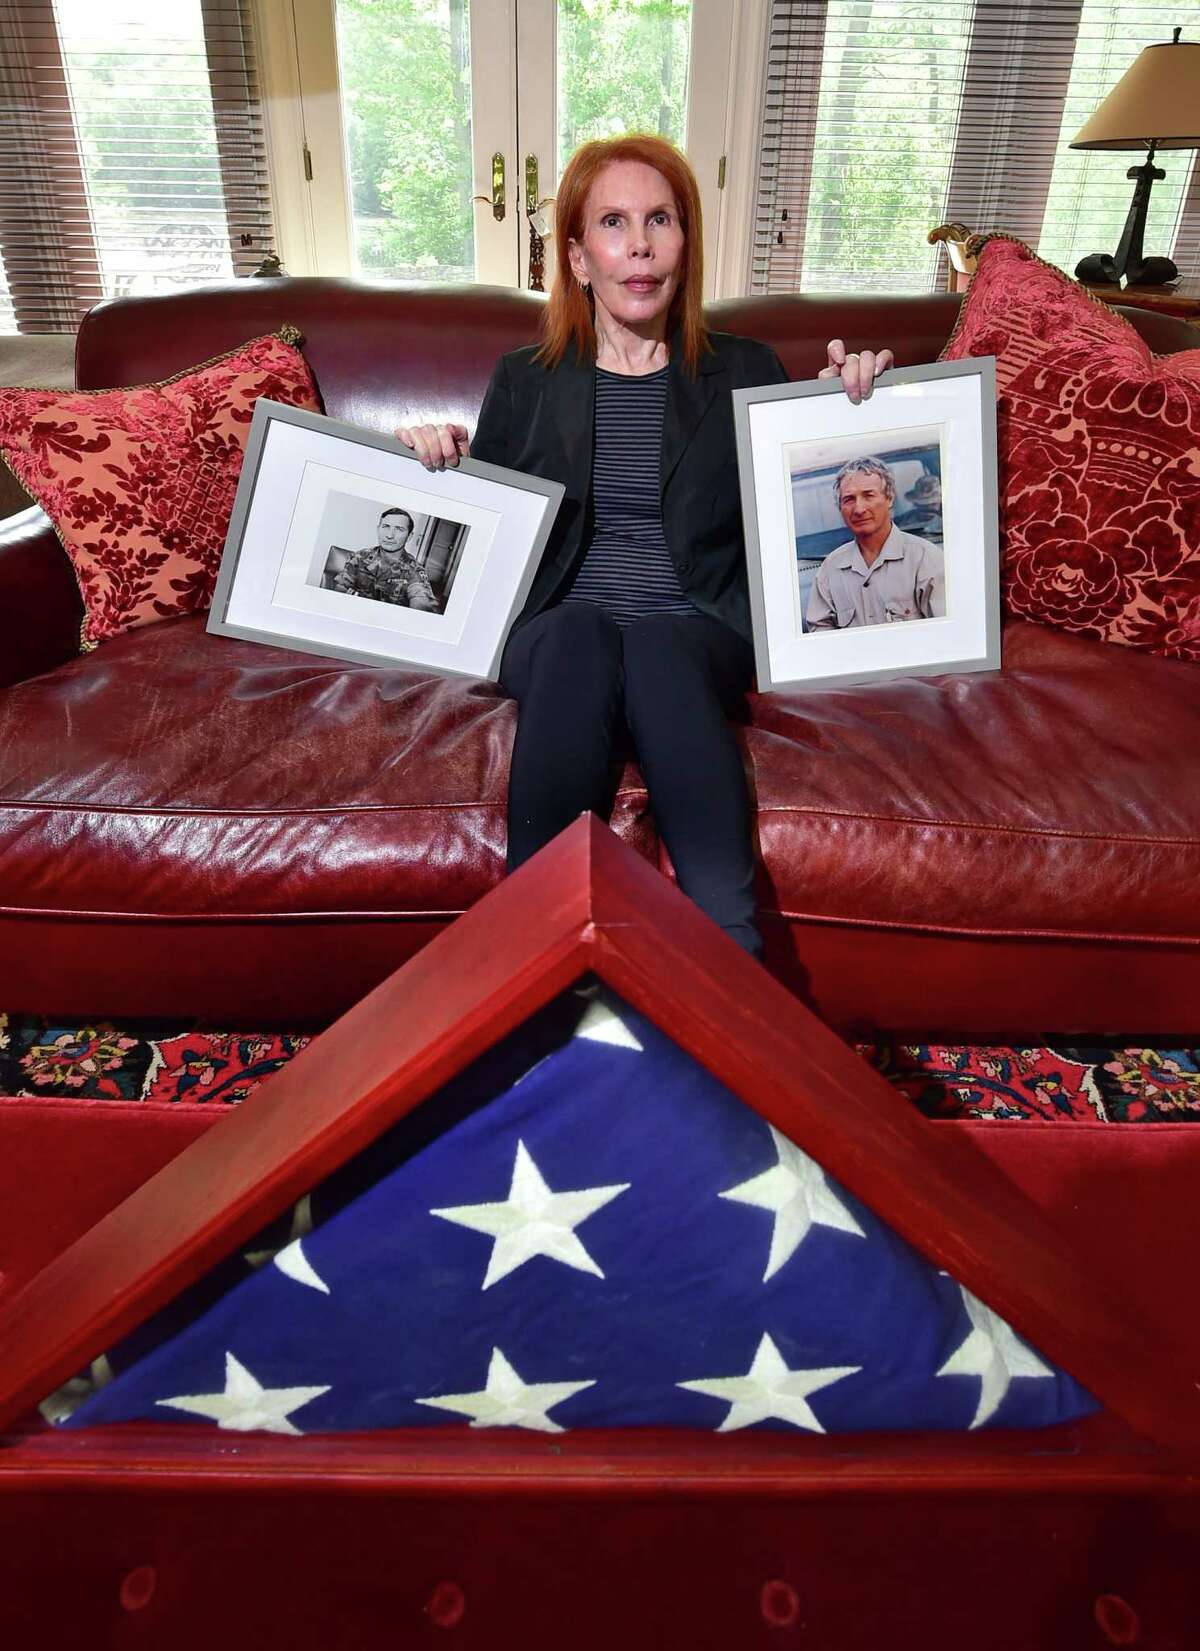 Eilhys England Hackworth, who started a nonprofit to help veterans cope with traumatic brain injury and PTSD, poses with photos of her late husband, Col. David H. Hackworth, at her home in Greenwich, Conn., on Thursday May 26, 2022.